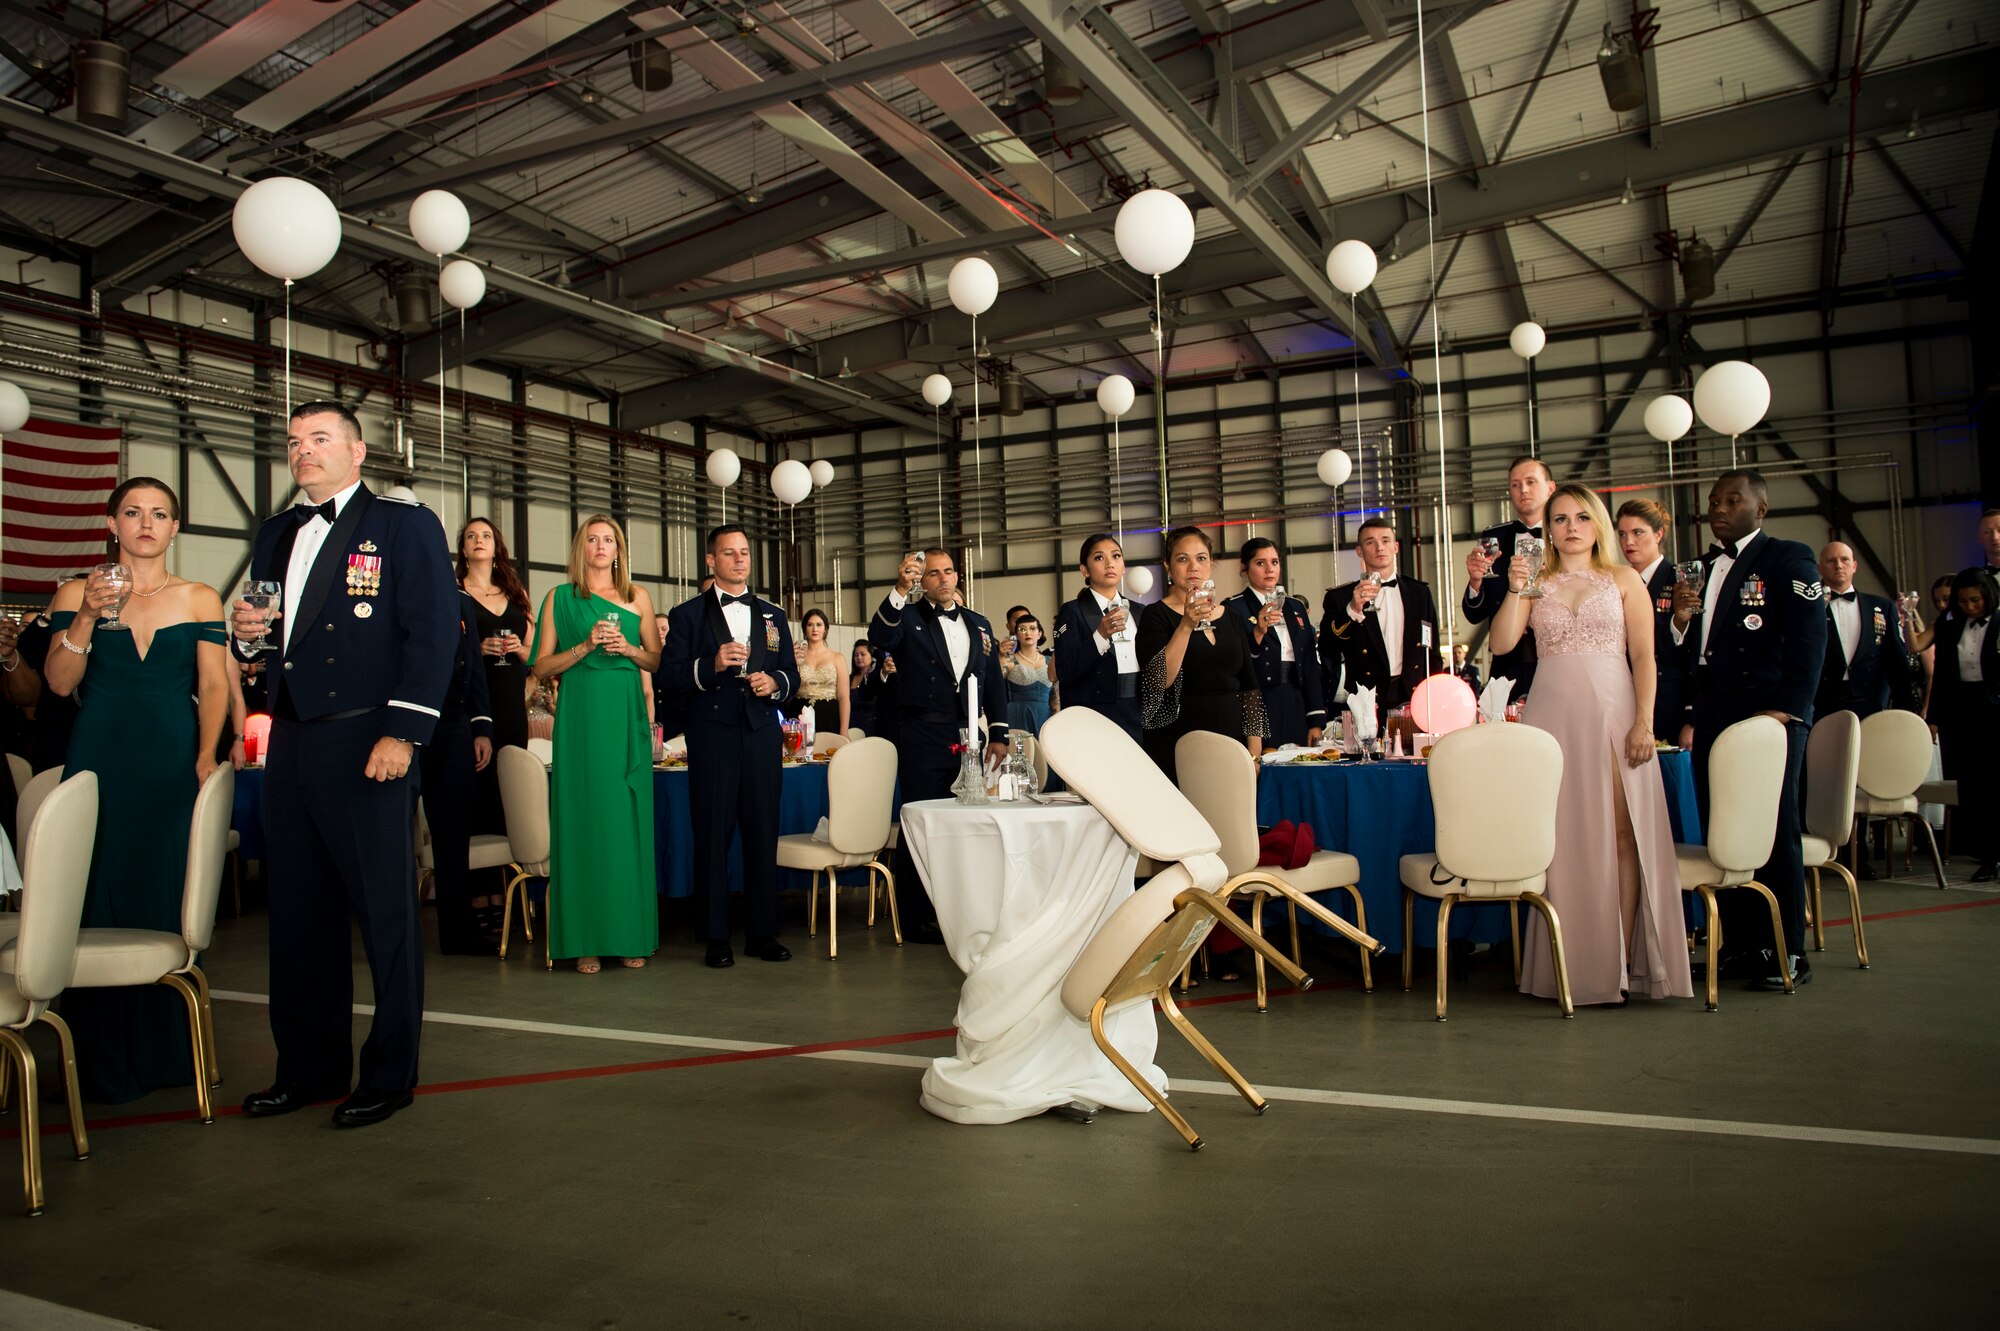 Attendees of the 72nd Air Force birthday ball raise a silent toast to the Prisoners of War and Missing in Action Americans at Ramstein Air Base, Germany, Sept. 21, 2019. During the POW/MIA toast, a glass of water is raised to honor those service members who cannot be at the ball to celebrate with the attendees. (U.S. Air Force photo by Staff Sgt. Jonathan Bass)